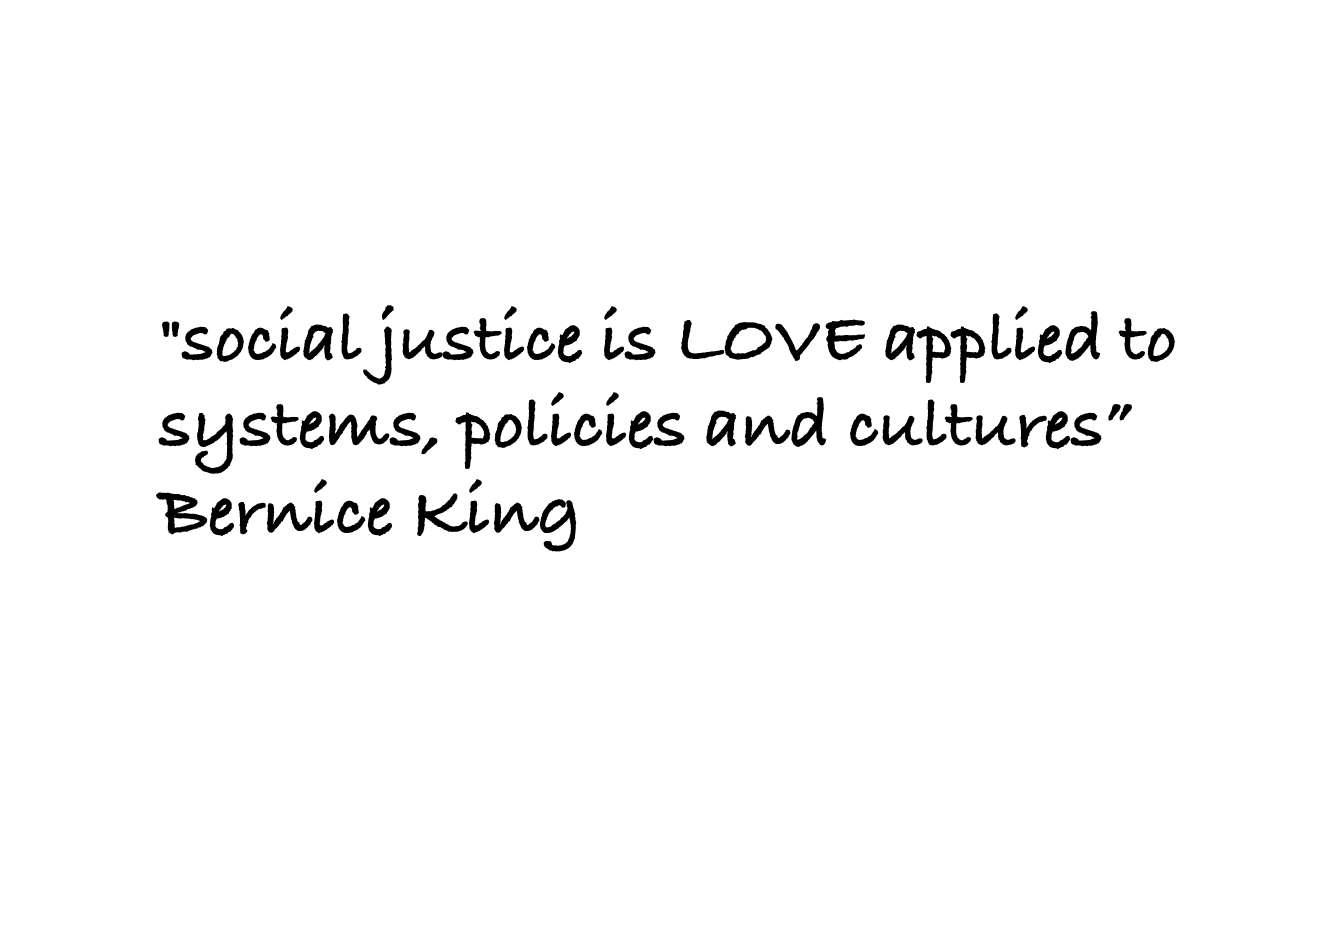 Welcome to Talk Social Justice!